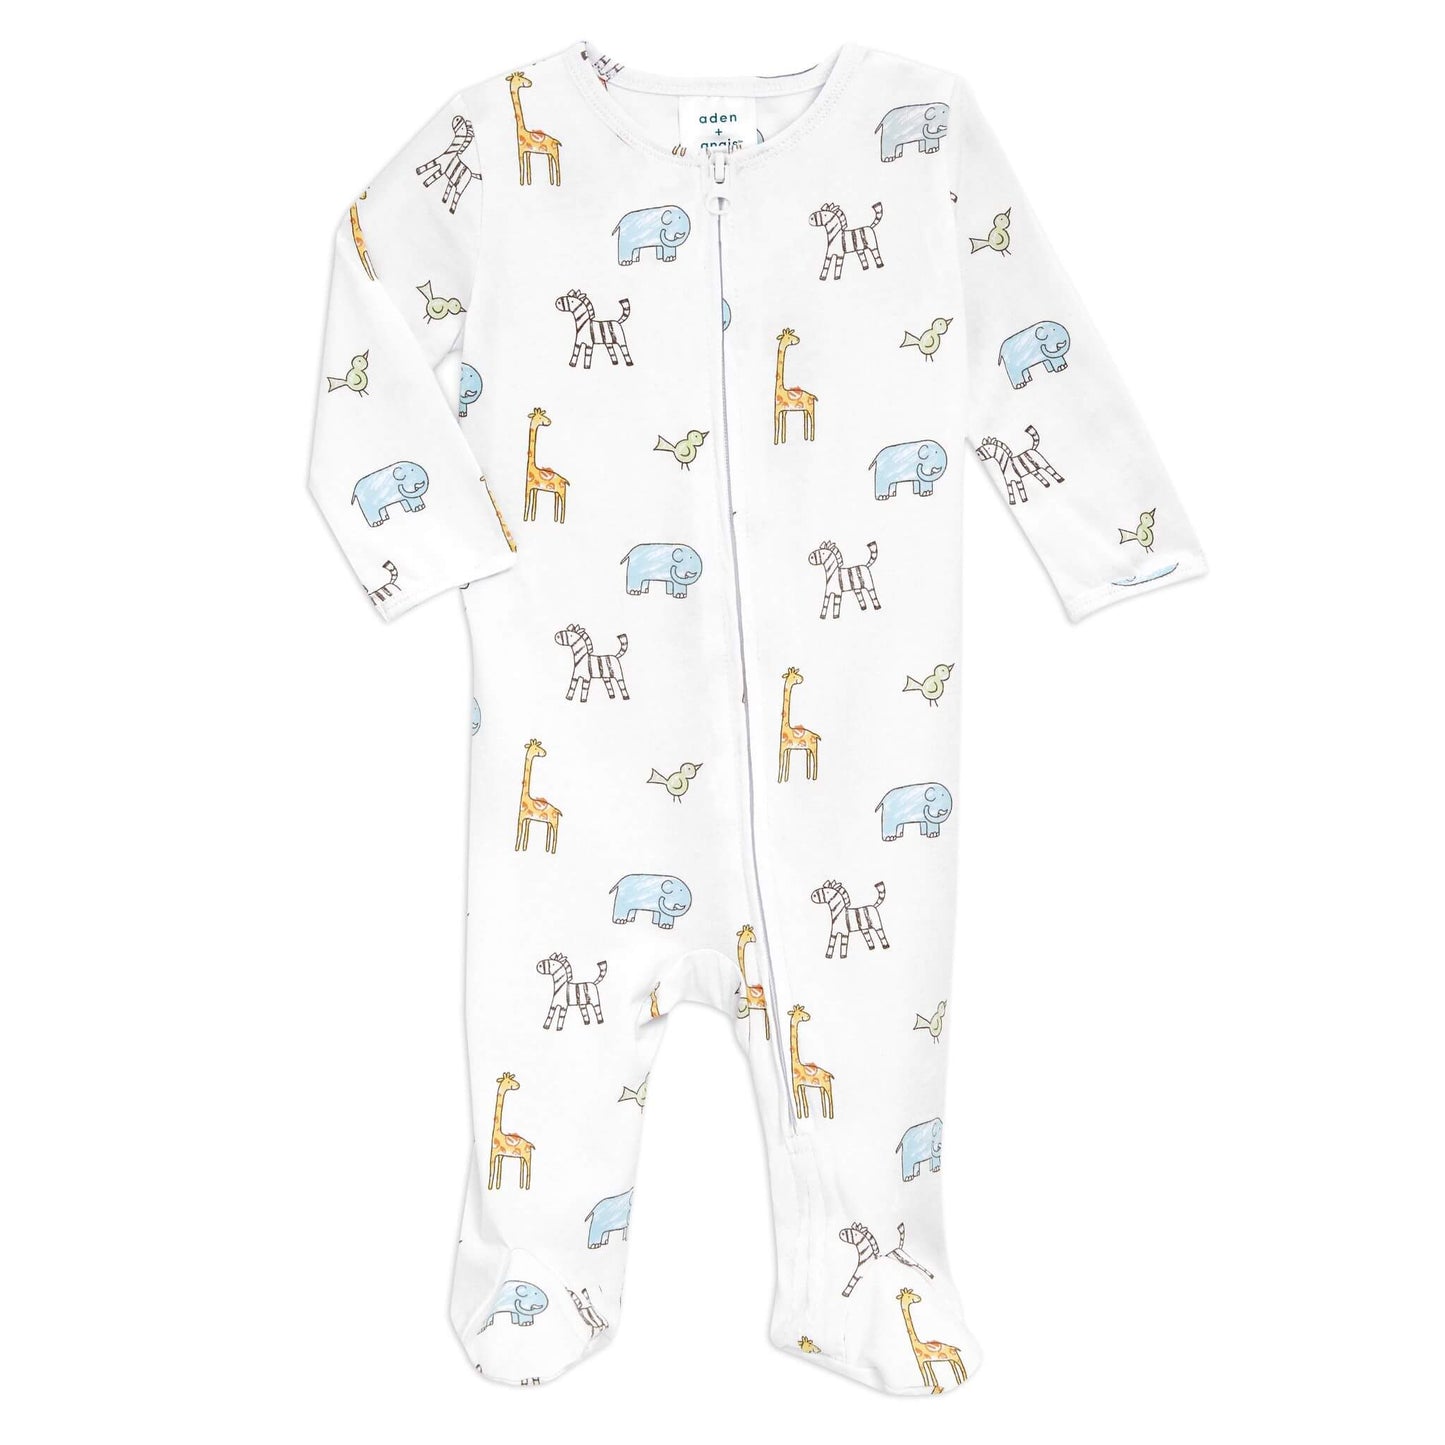 Super soft with just the right amount of stretch, the aden + anais baby footie offers maximum comfort and security. Featuring a functional “top to toe” zip for easy nappy changes.